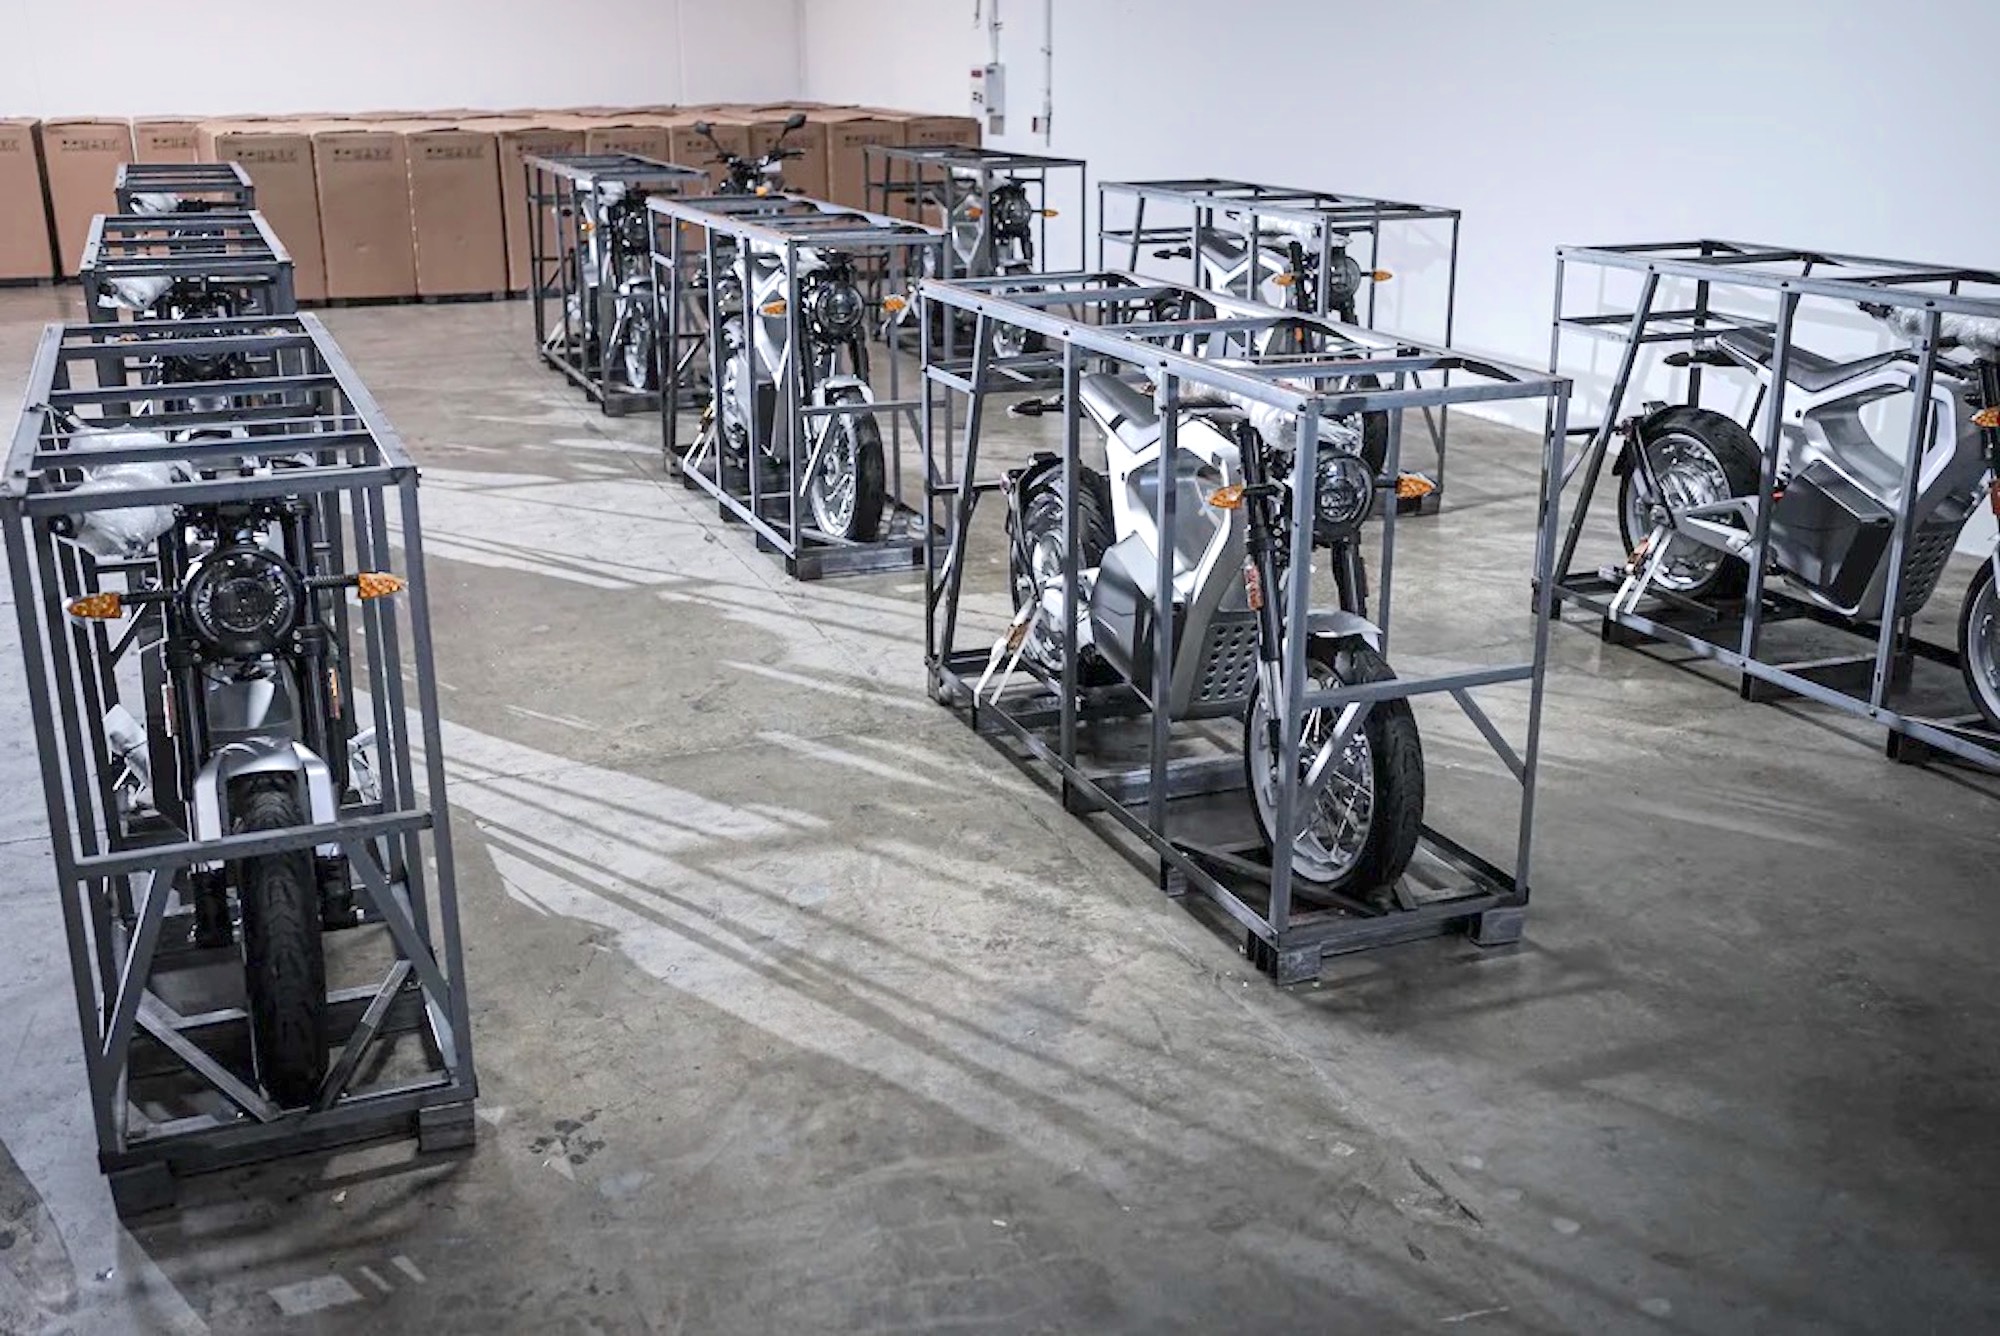 The SONDORS MetaCycle, preparing for deliveries around America. Media sourced from Electrek.